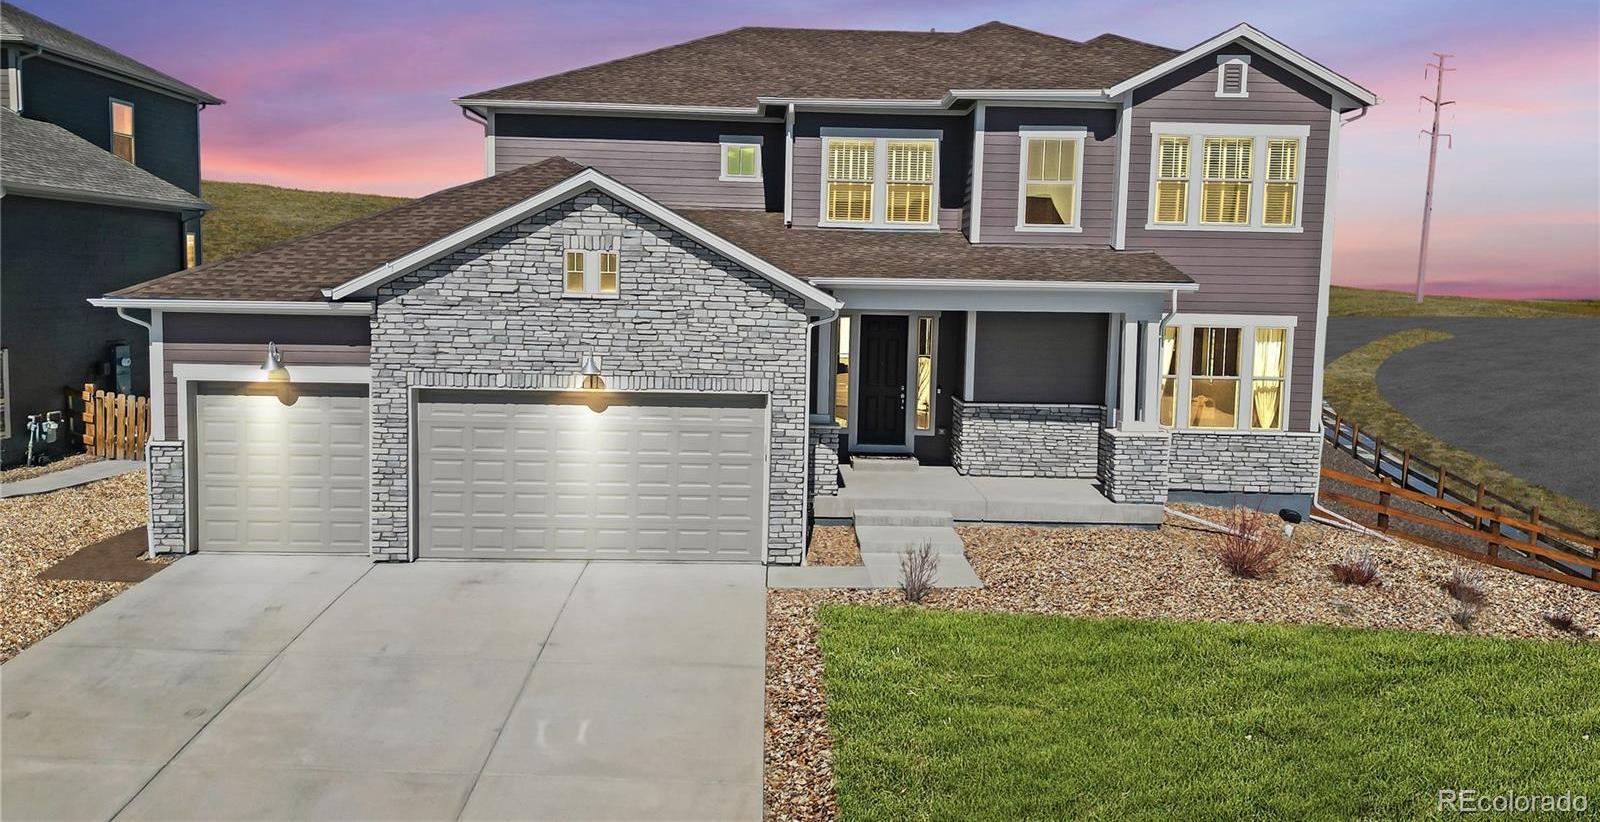 Photo one of 18201 W 95Th Pl Arvada CO 80007 | MLS 7758619